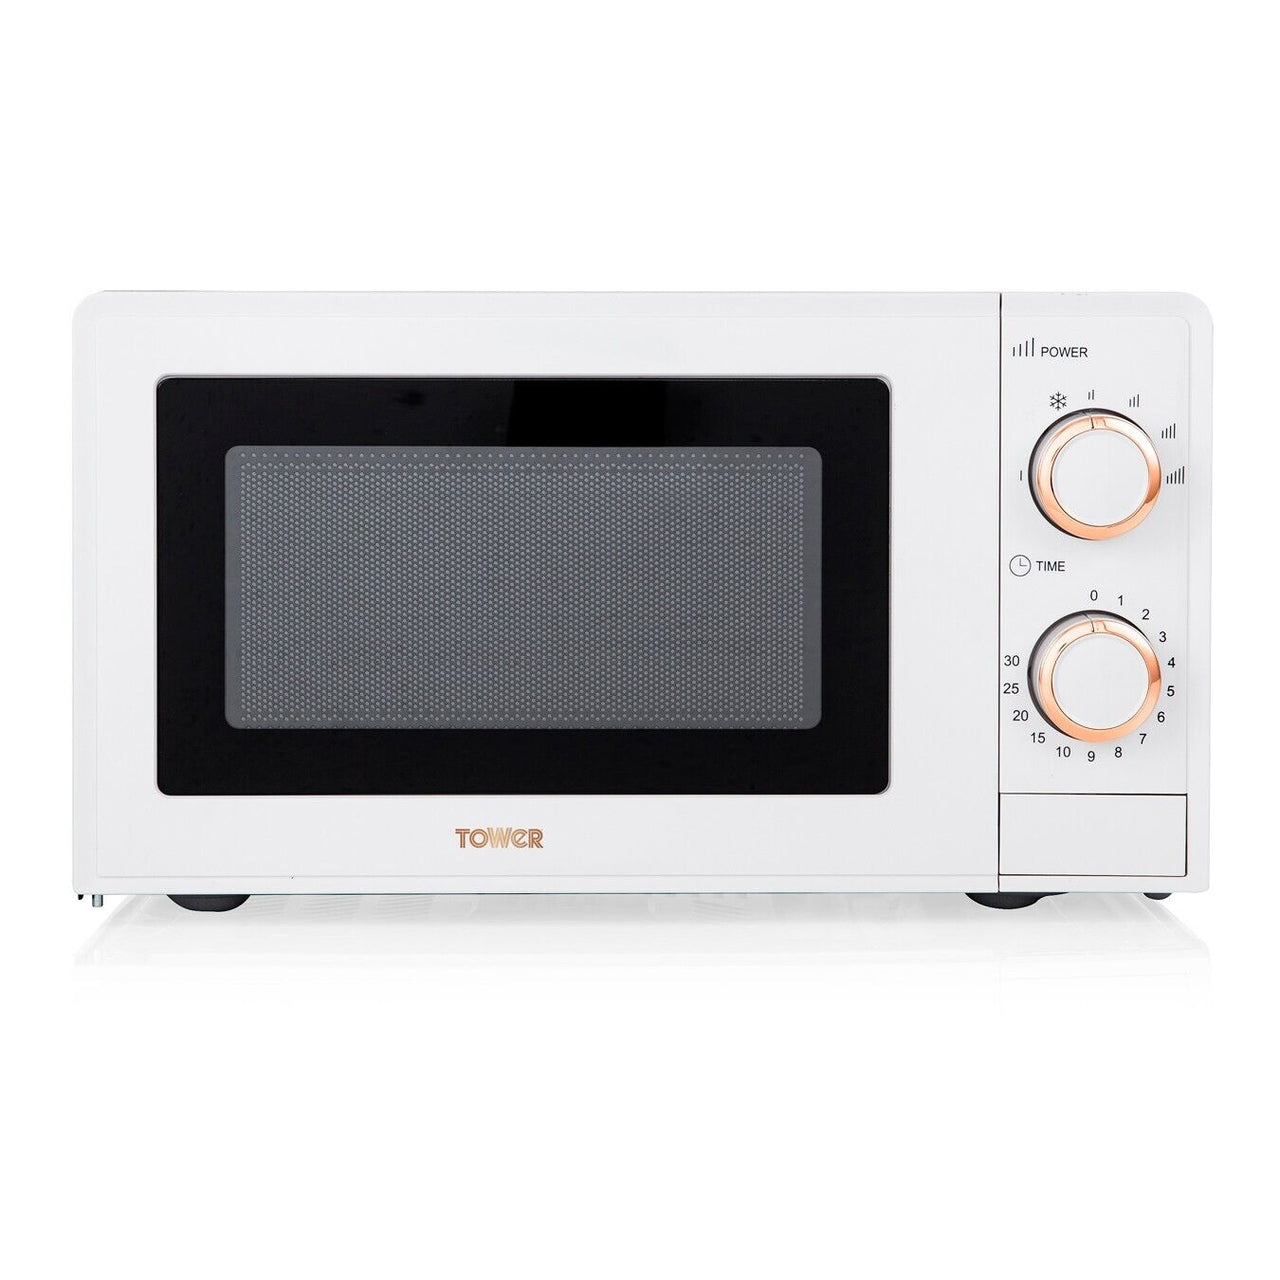 Tower T24029WRG  17L 700W Microwave in White & Rose Gold - New -3 Year Guarantee